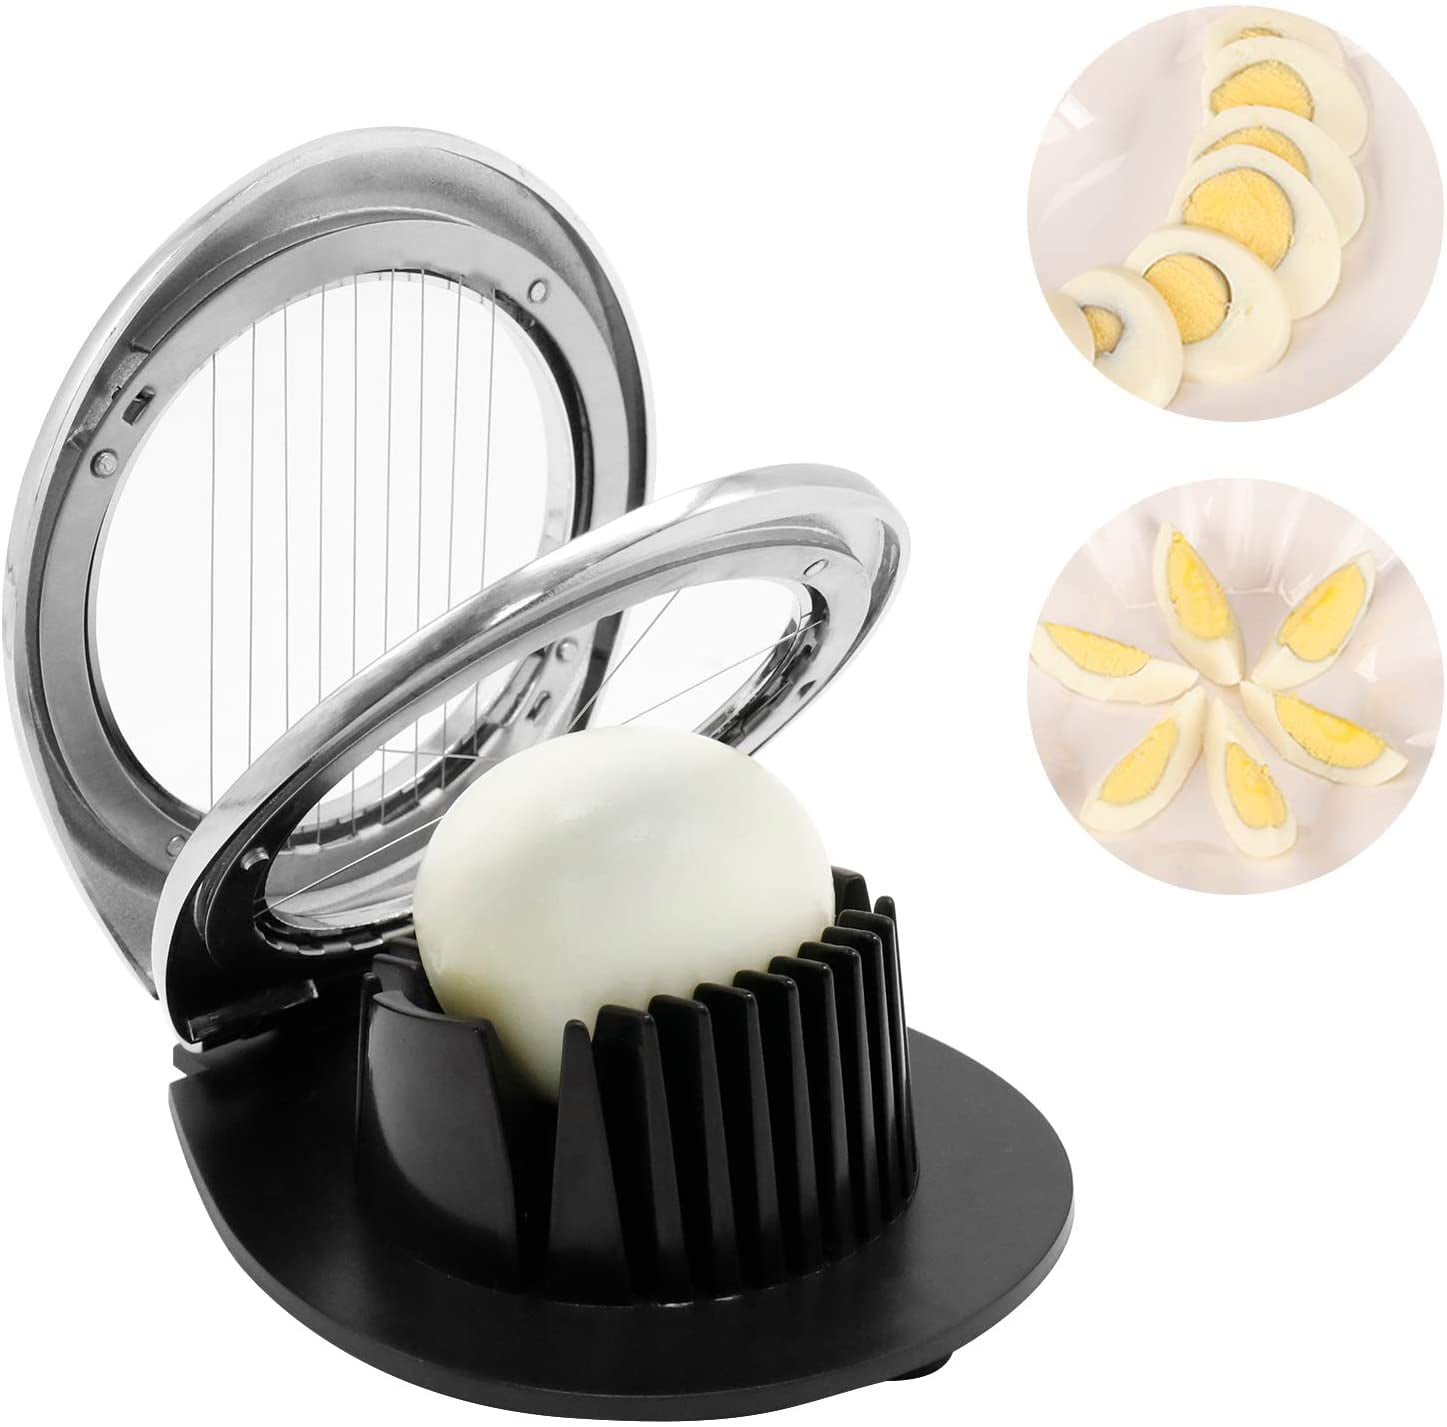 Egg Slicer for Hard Boiled Eggs,Egg Dicer with 3 Slicing Styles,Sturdy ABS Body and Non-slip Feet,Dishwasher Safe 